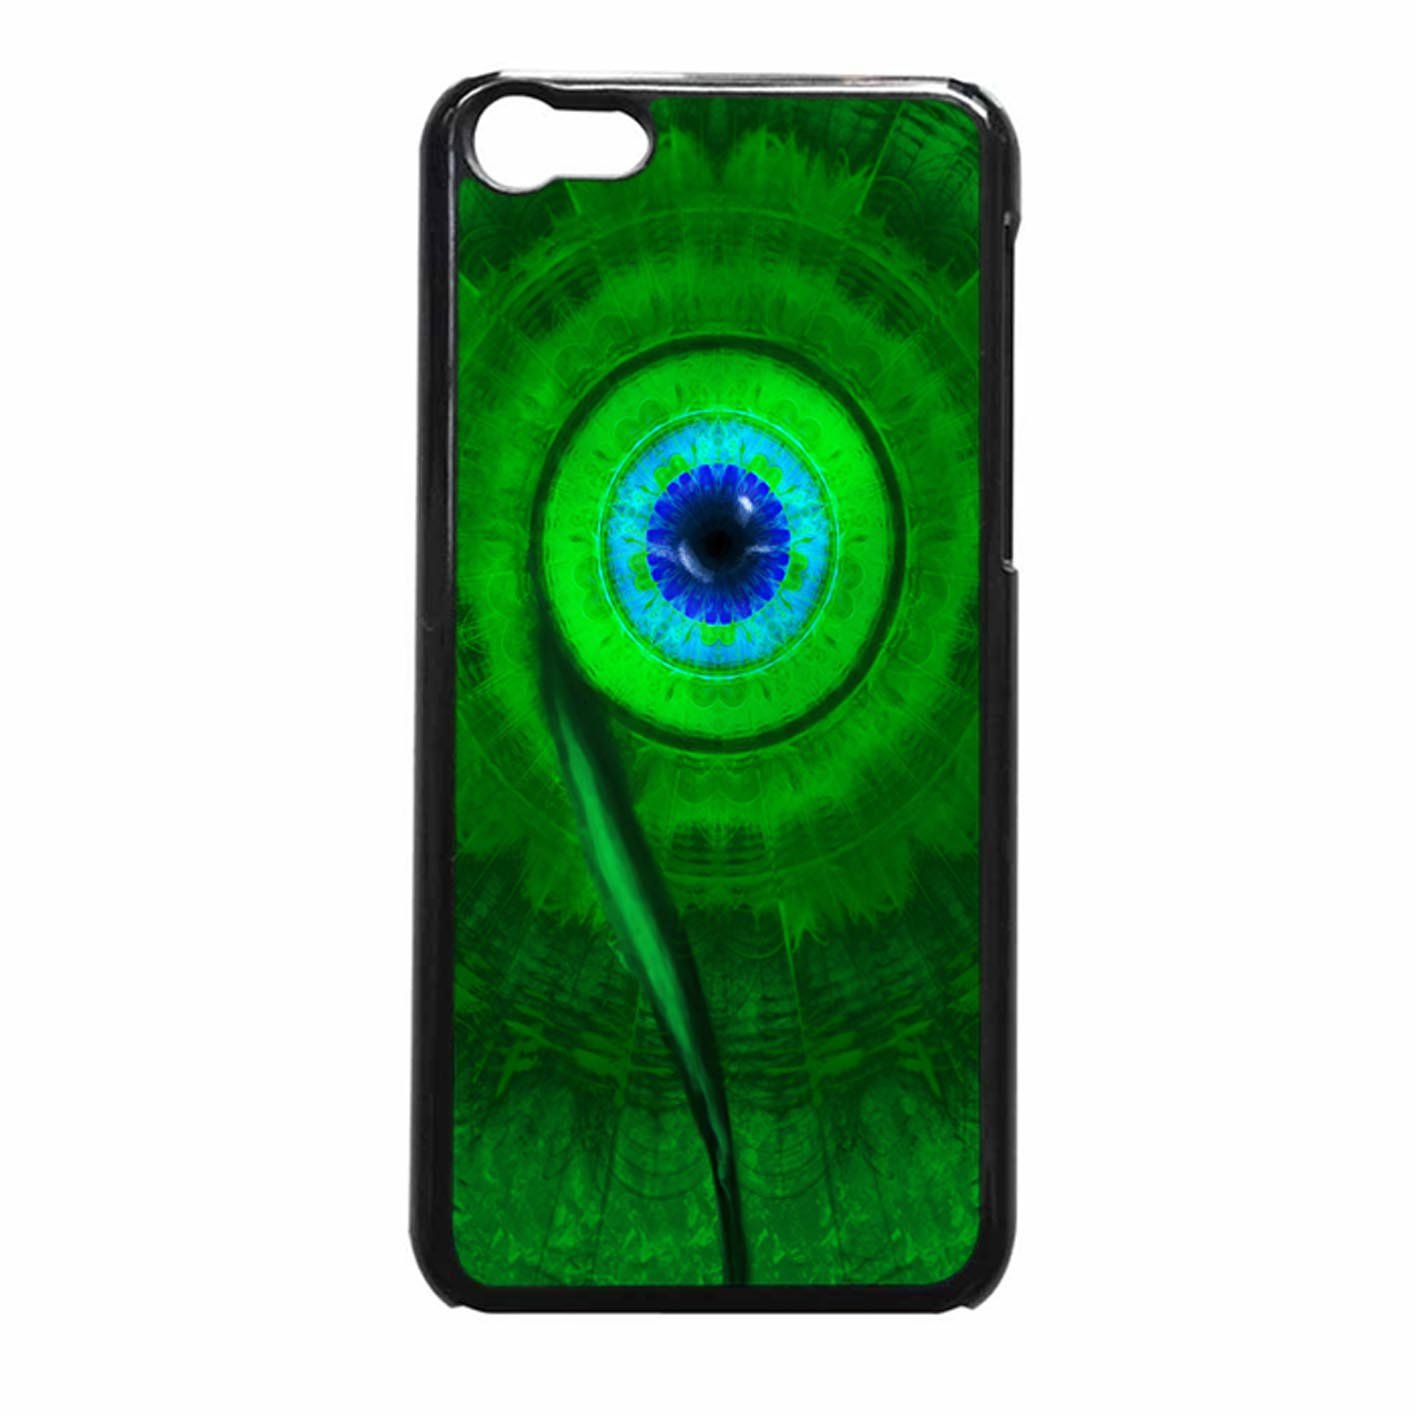 Jacksepticeye Wallpaper Iphone 5c Case - Mobile Phone Case , HD Wallpaper & Backgrounds